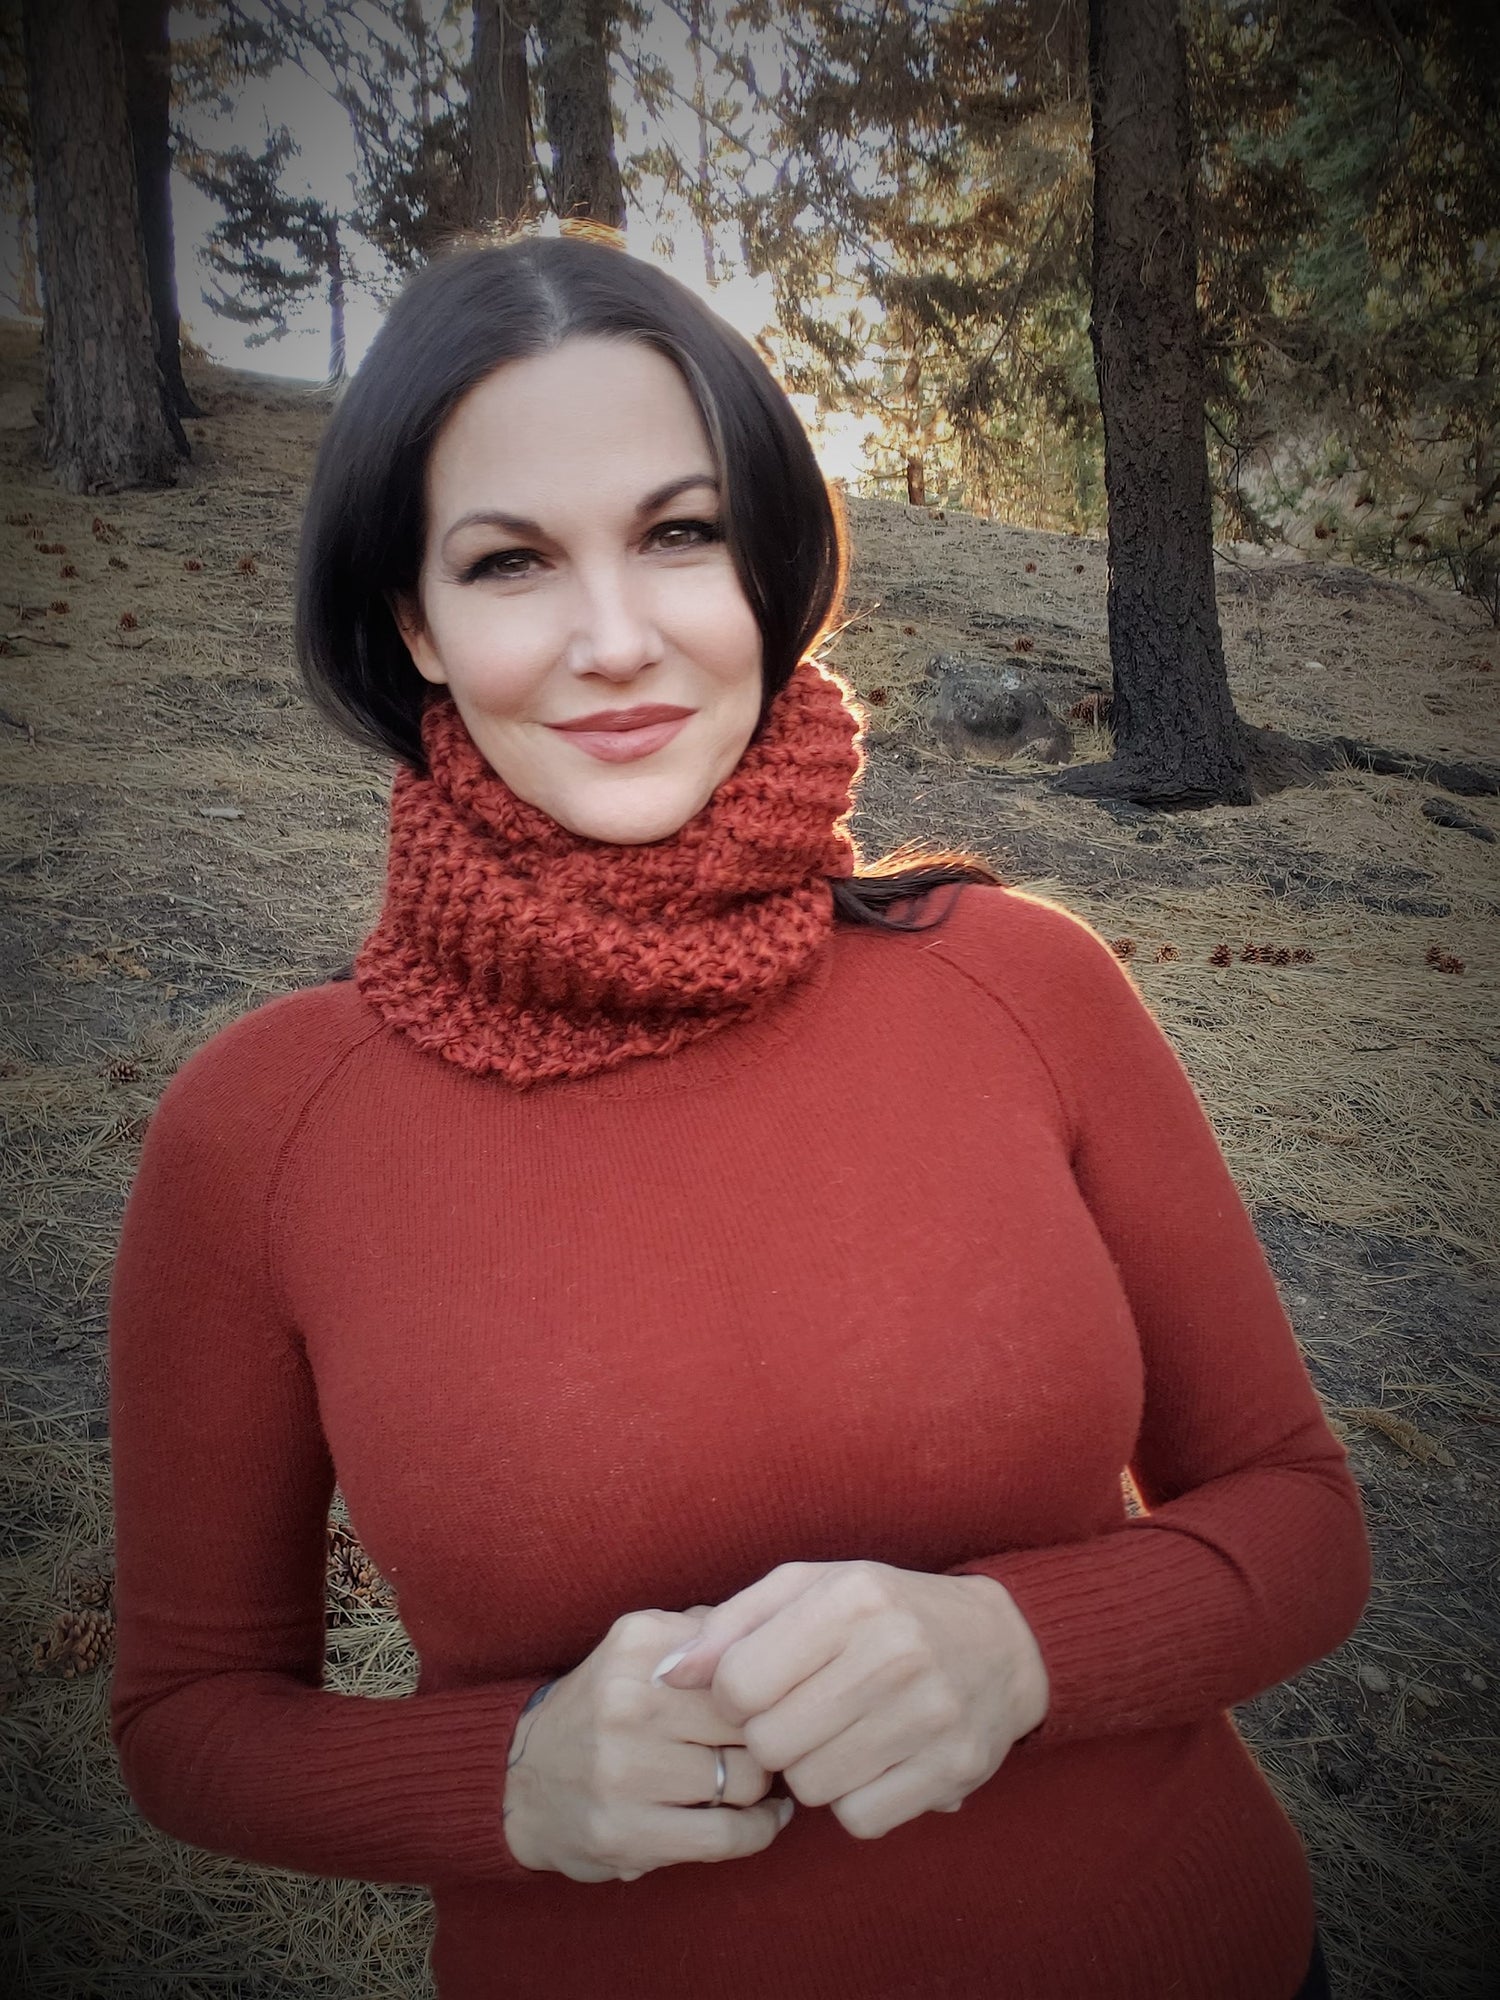 The "Mahogany" Brick Red Hand Knitted Infinity Scarf or Cowl